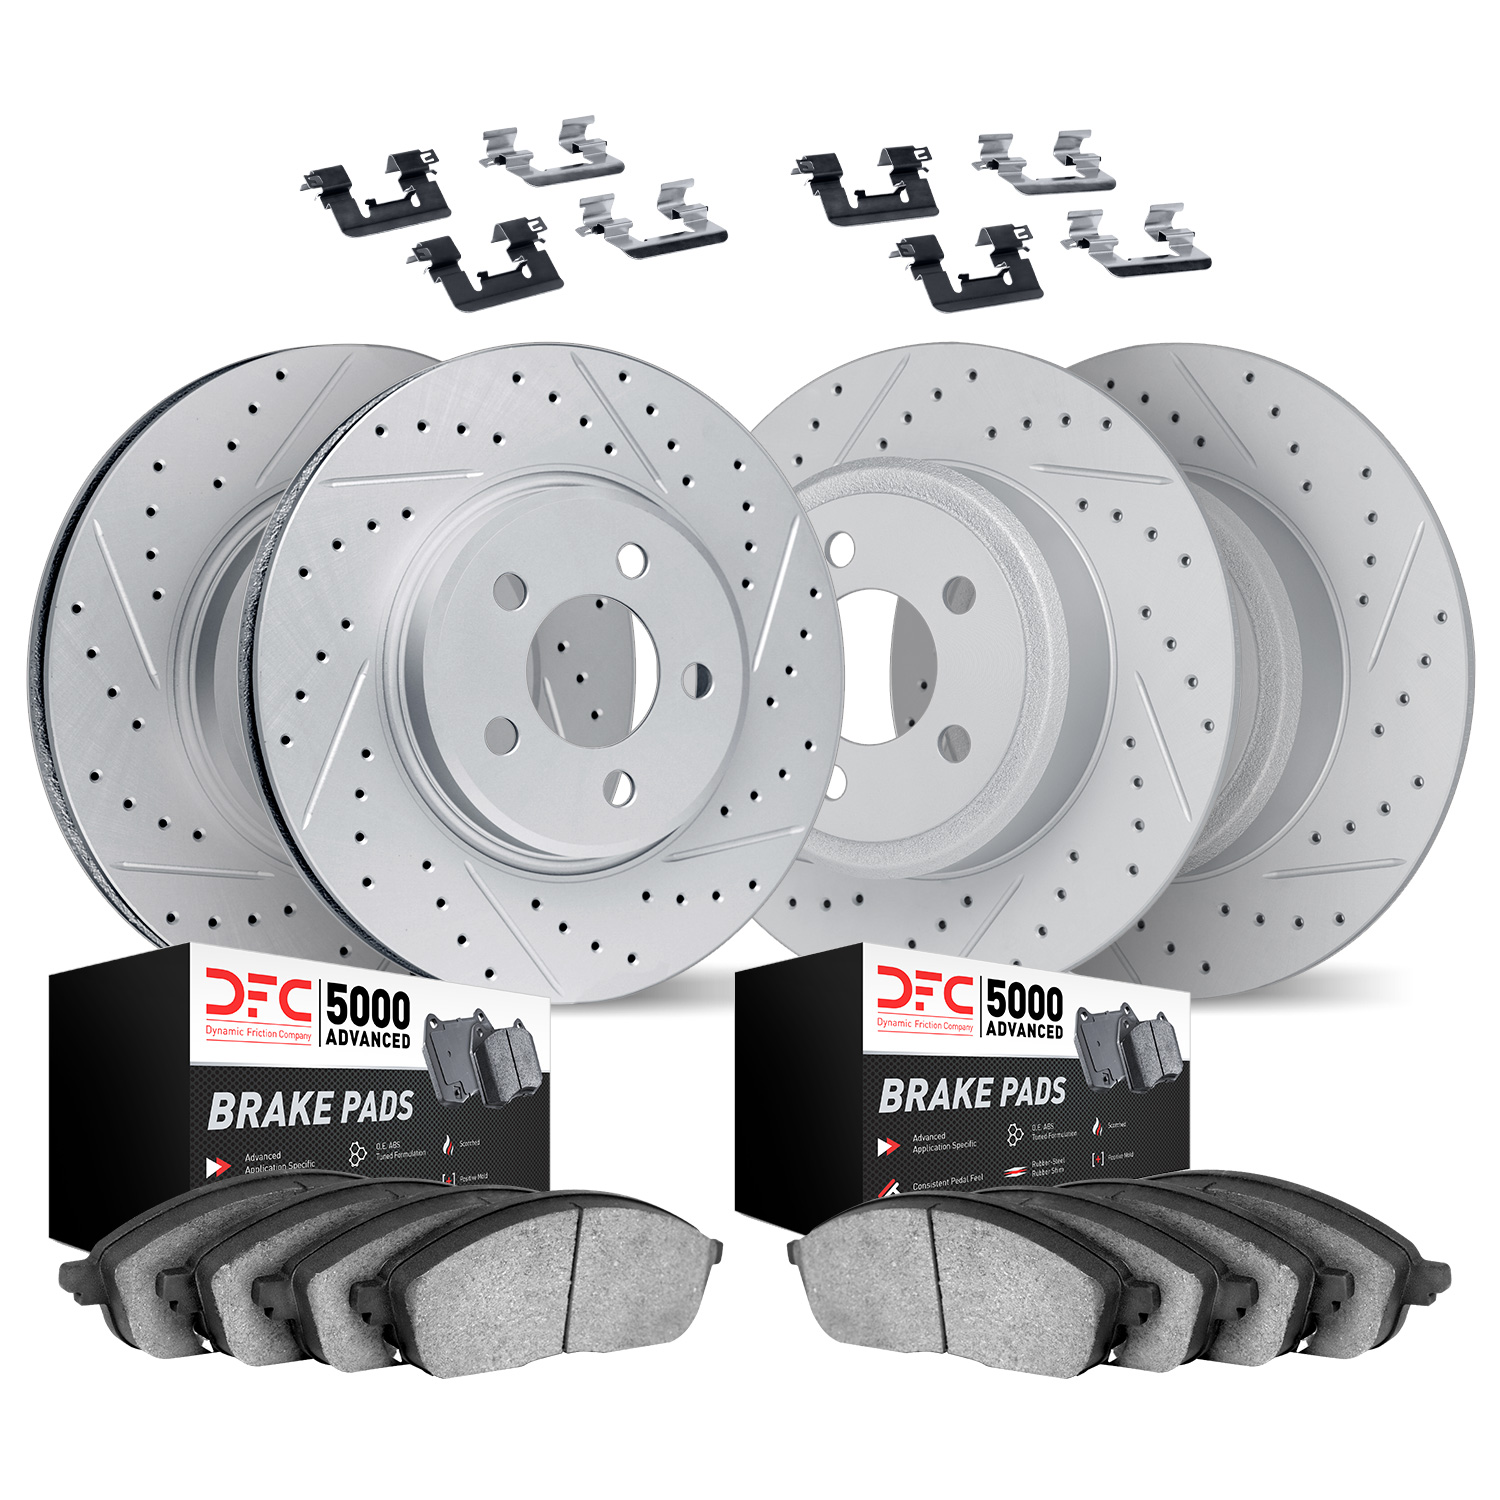 2514-45022 Geoperformance Drilled/Slotted Rotors w/5000 Advanced Brake Pads Kit & Hardware, 2018-2018 GM, Position: Front and Re